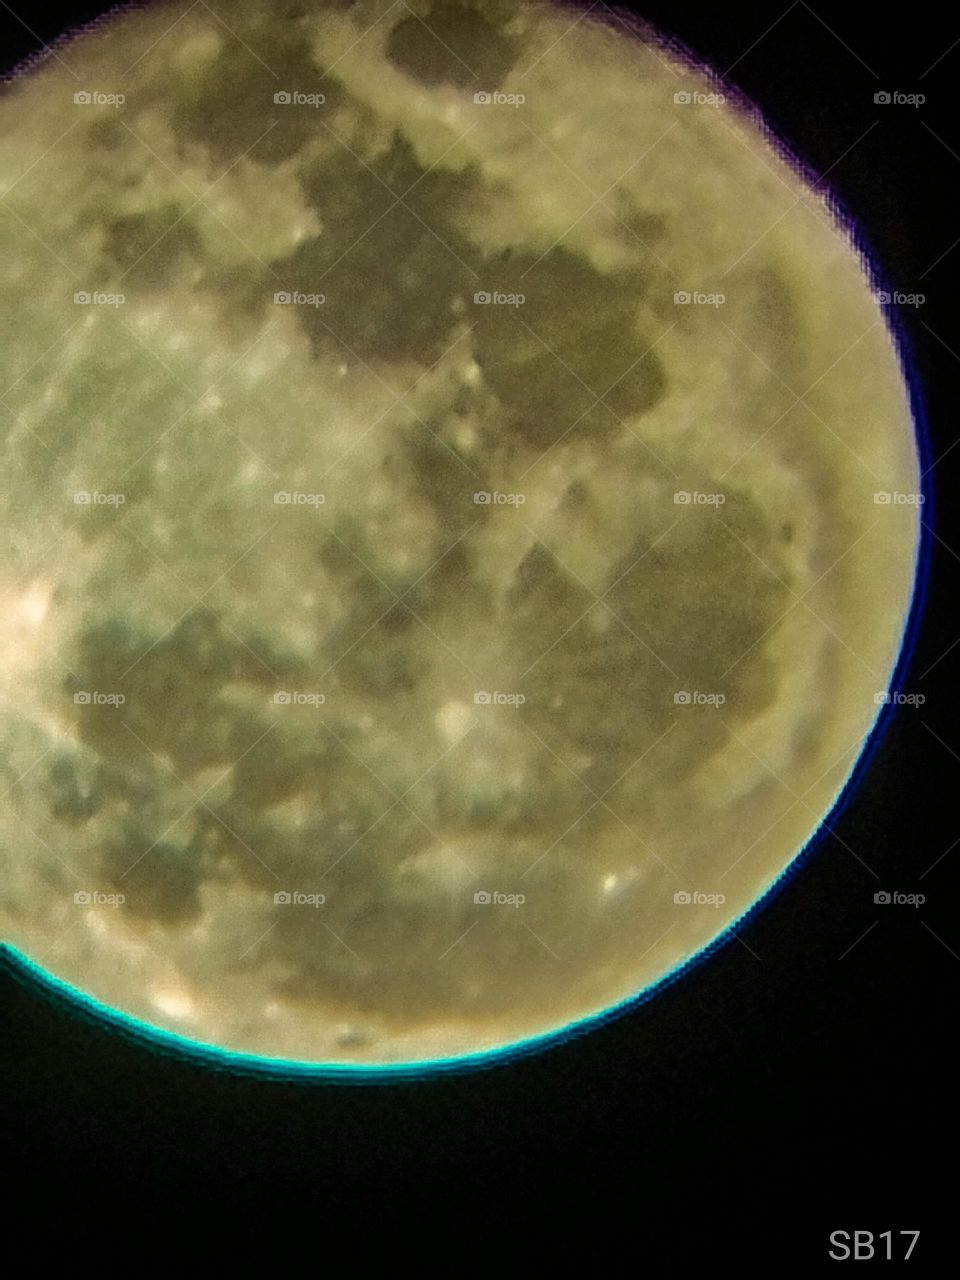 Full wolf moon. Taken with Telescope and Samsung Galaxy S7